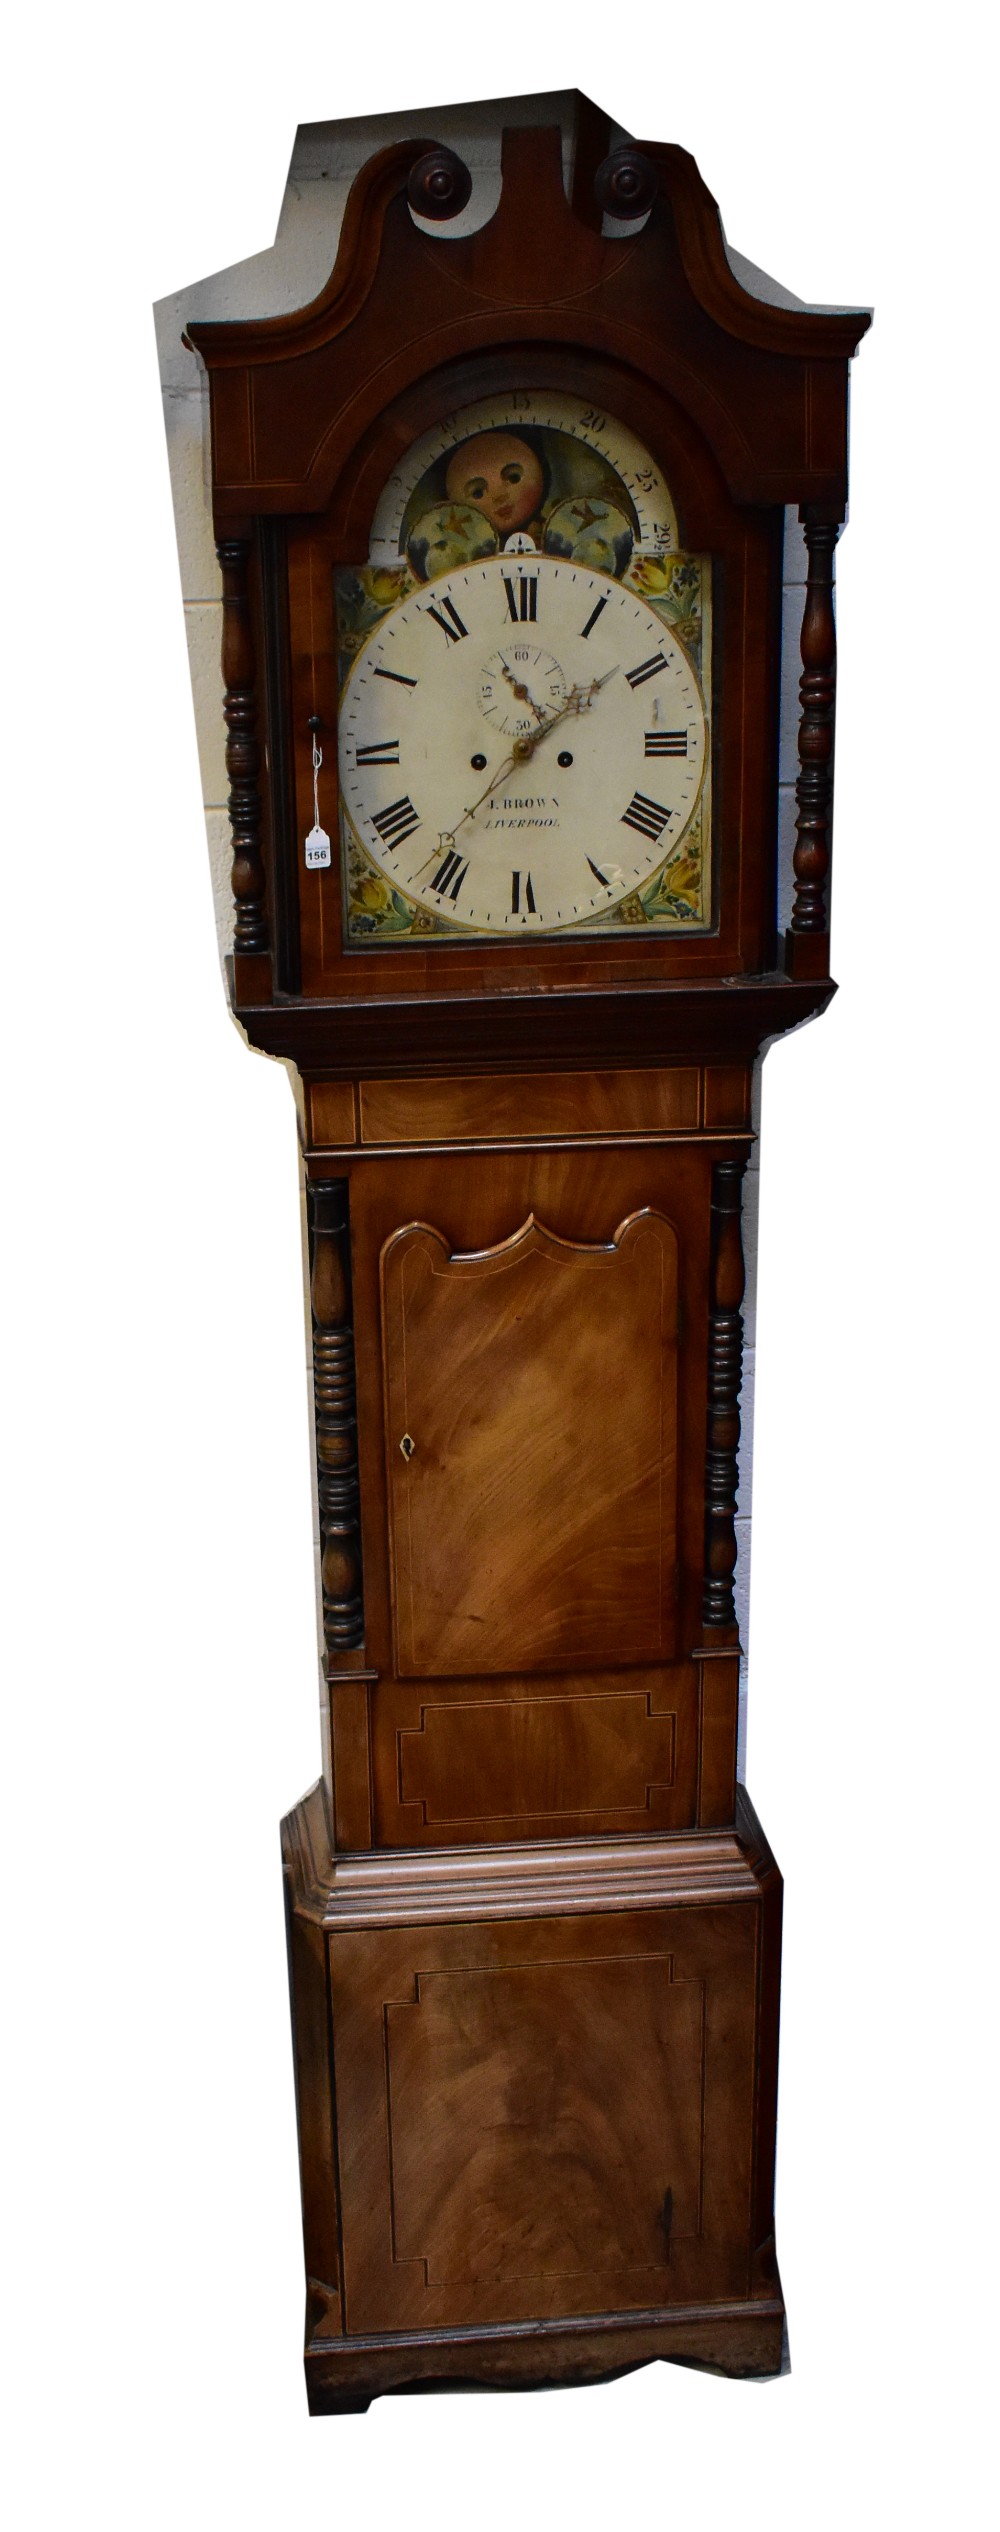 J BROWN, LIVERPOOL; a large 19th century mahogany eight day longcase clock,